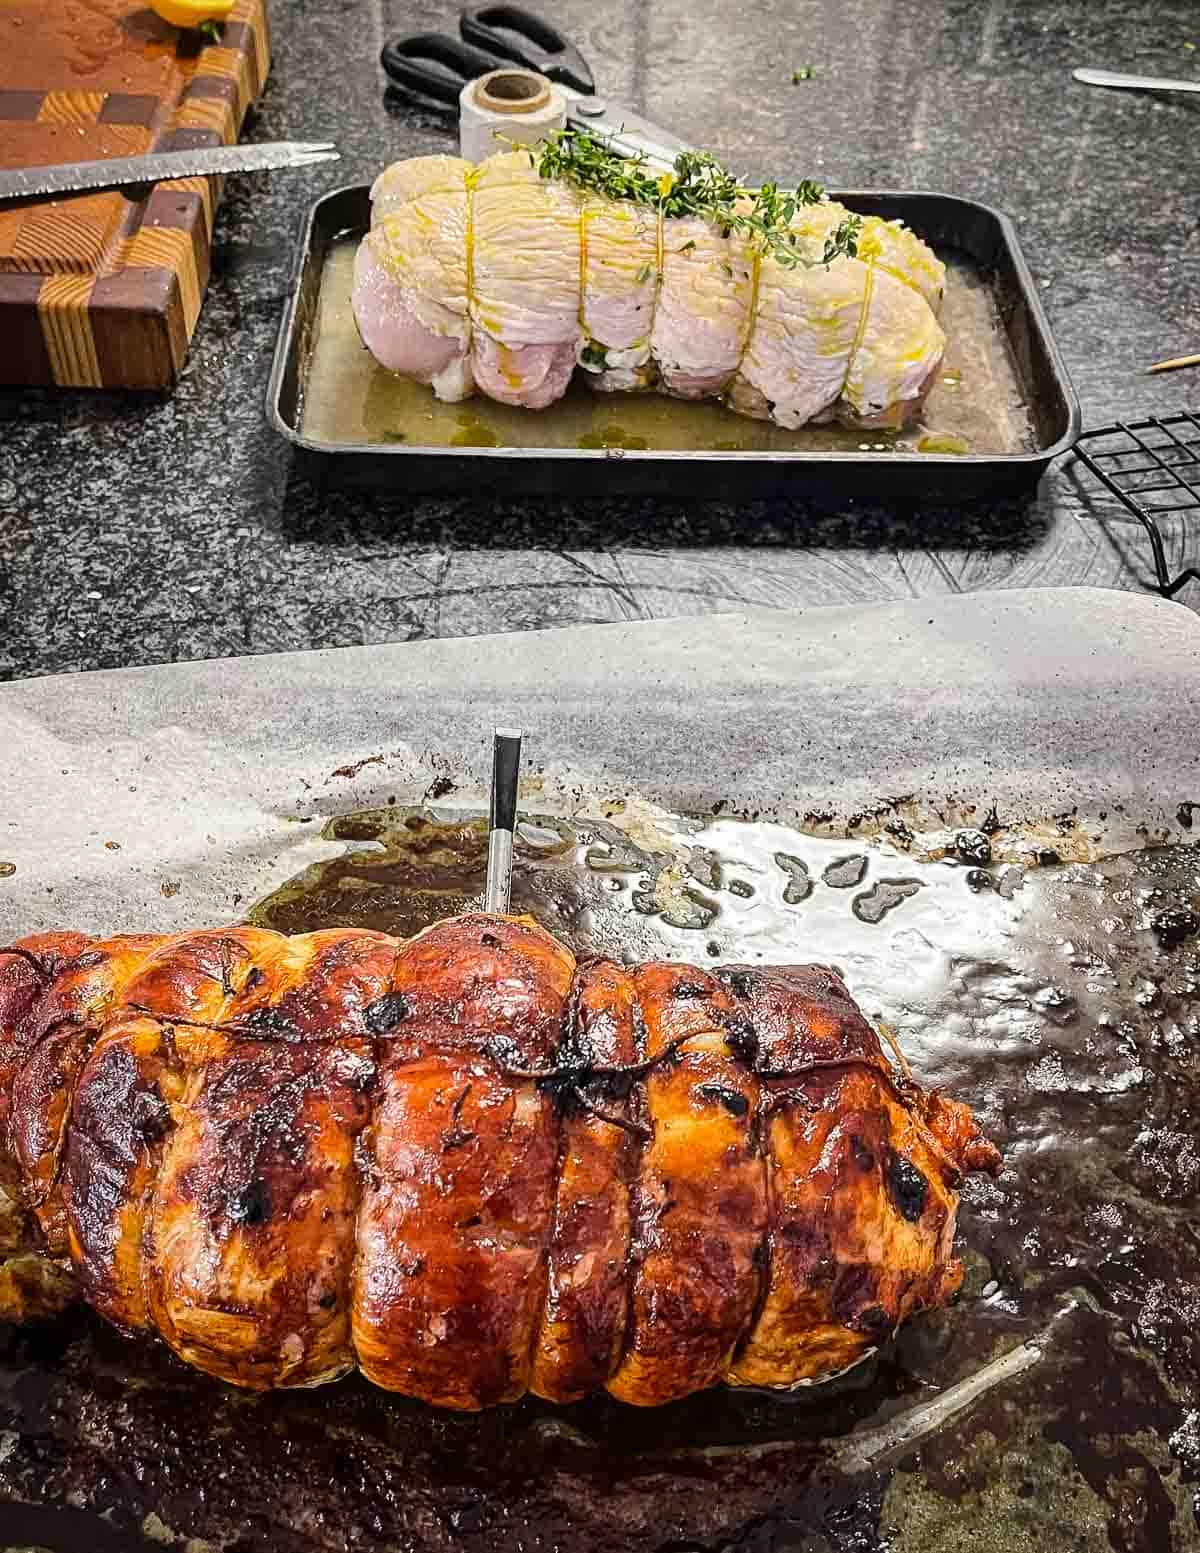 A cooked rolled roast in the foreground and an uncooked rolled roast in the background on a dark kitchen bench